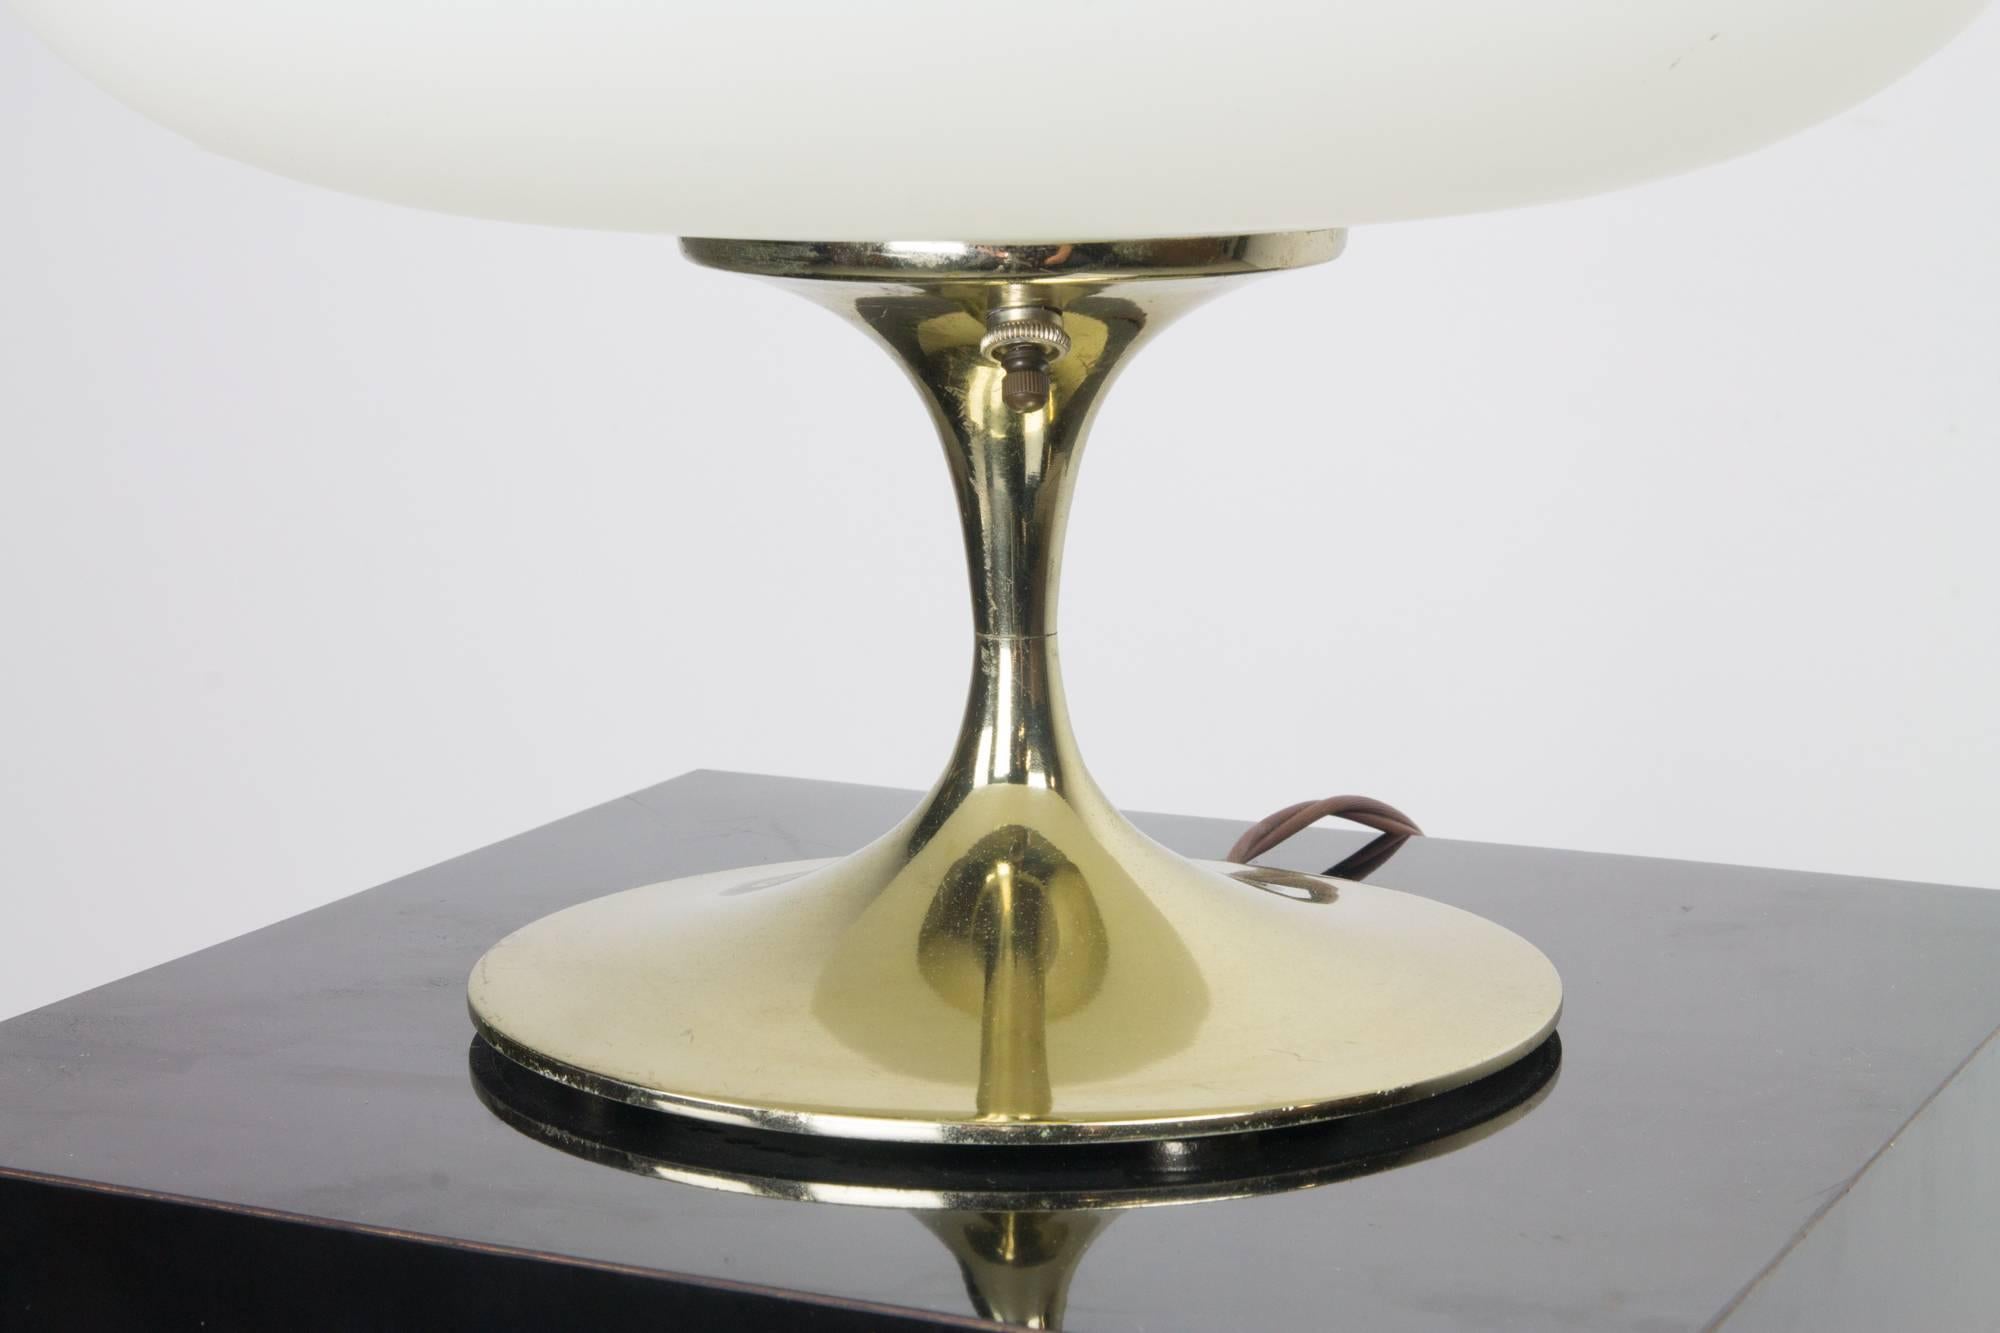 Mushroom-form table lamp by Bill Curry for Laurel with gold tone metal base and matte finish opal glass shade. Measure: Base diameter 7 in.